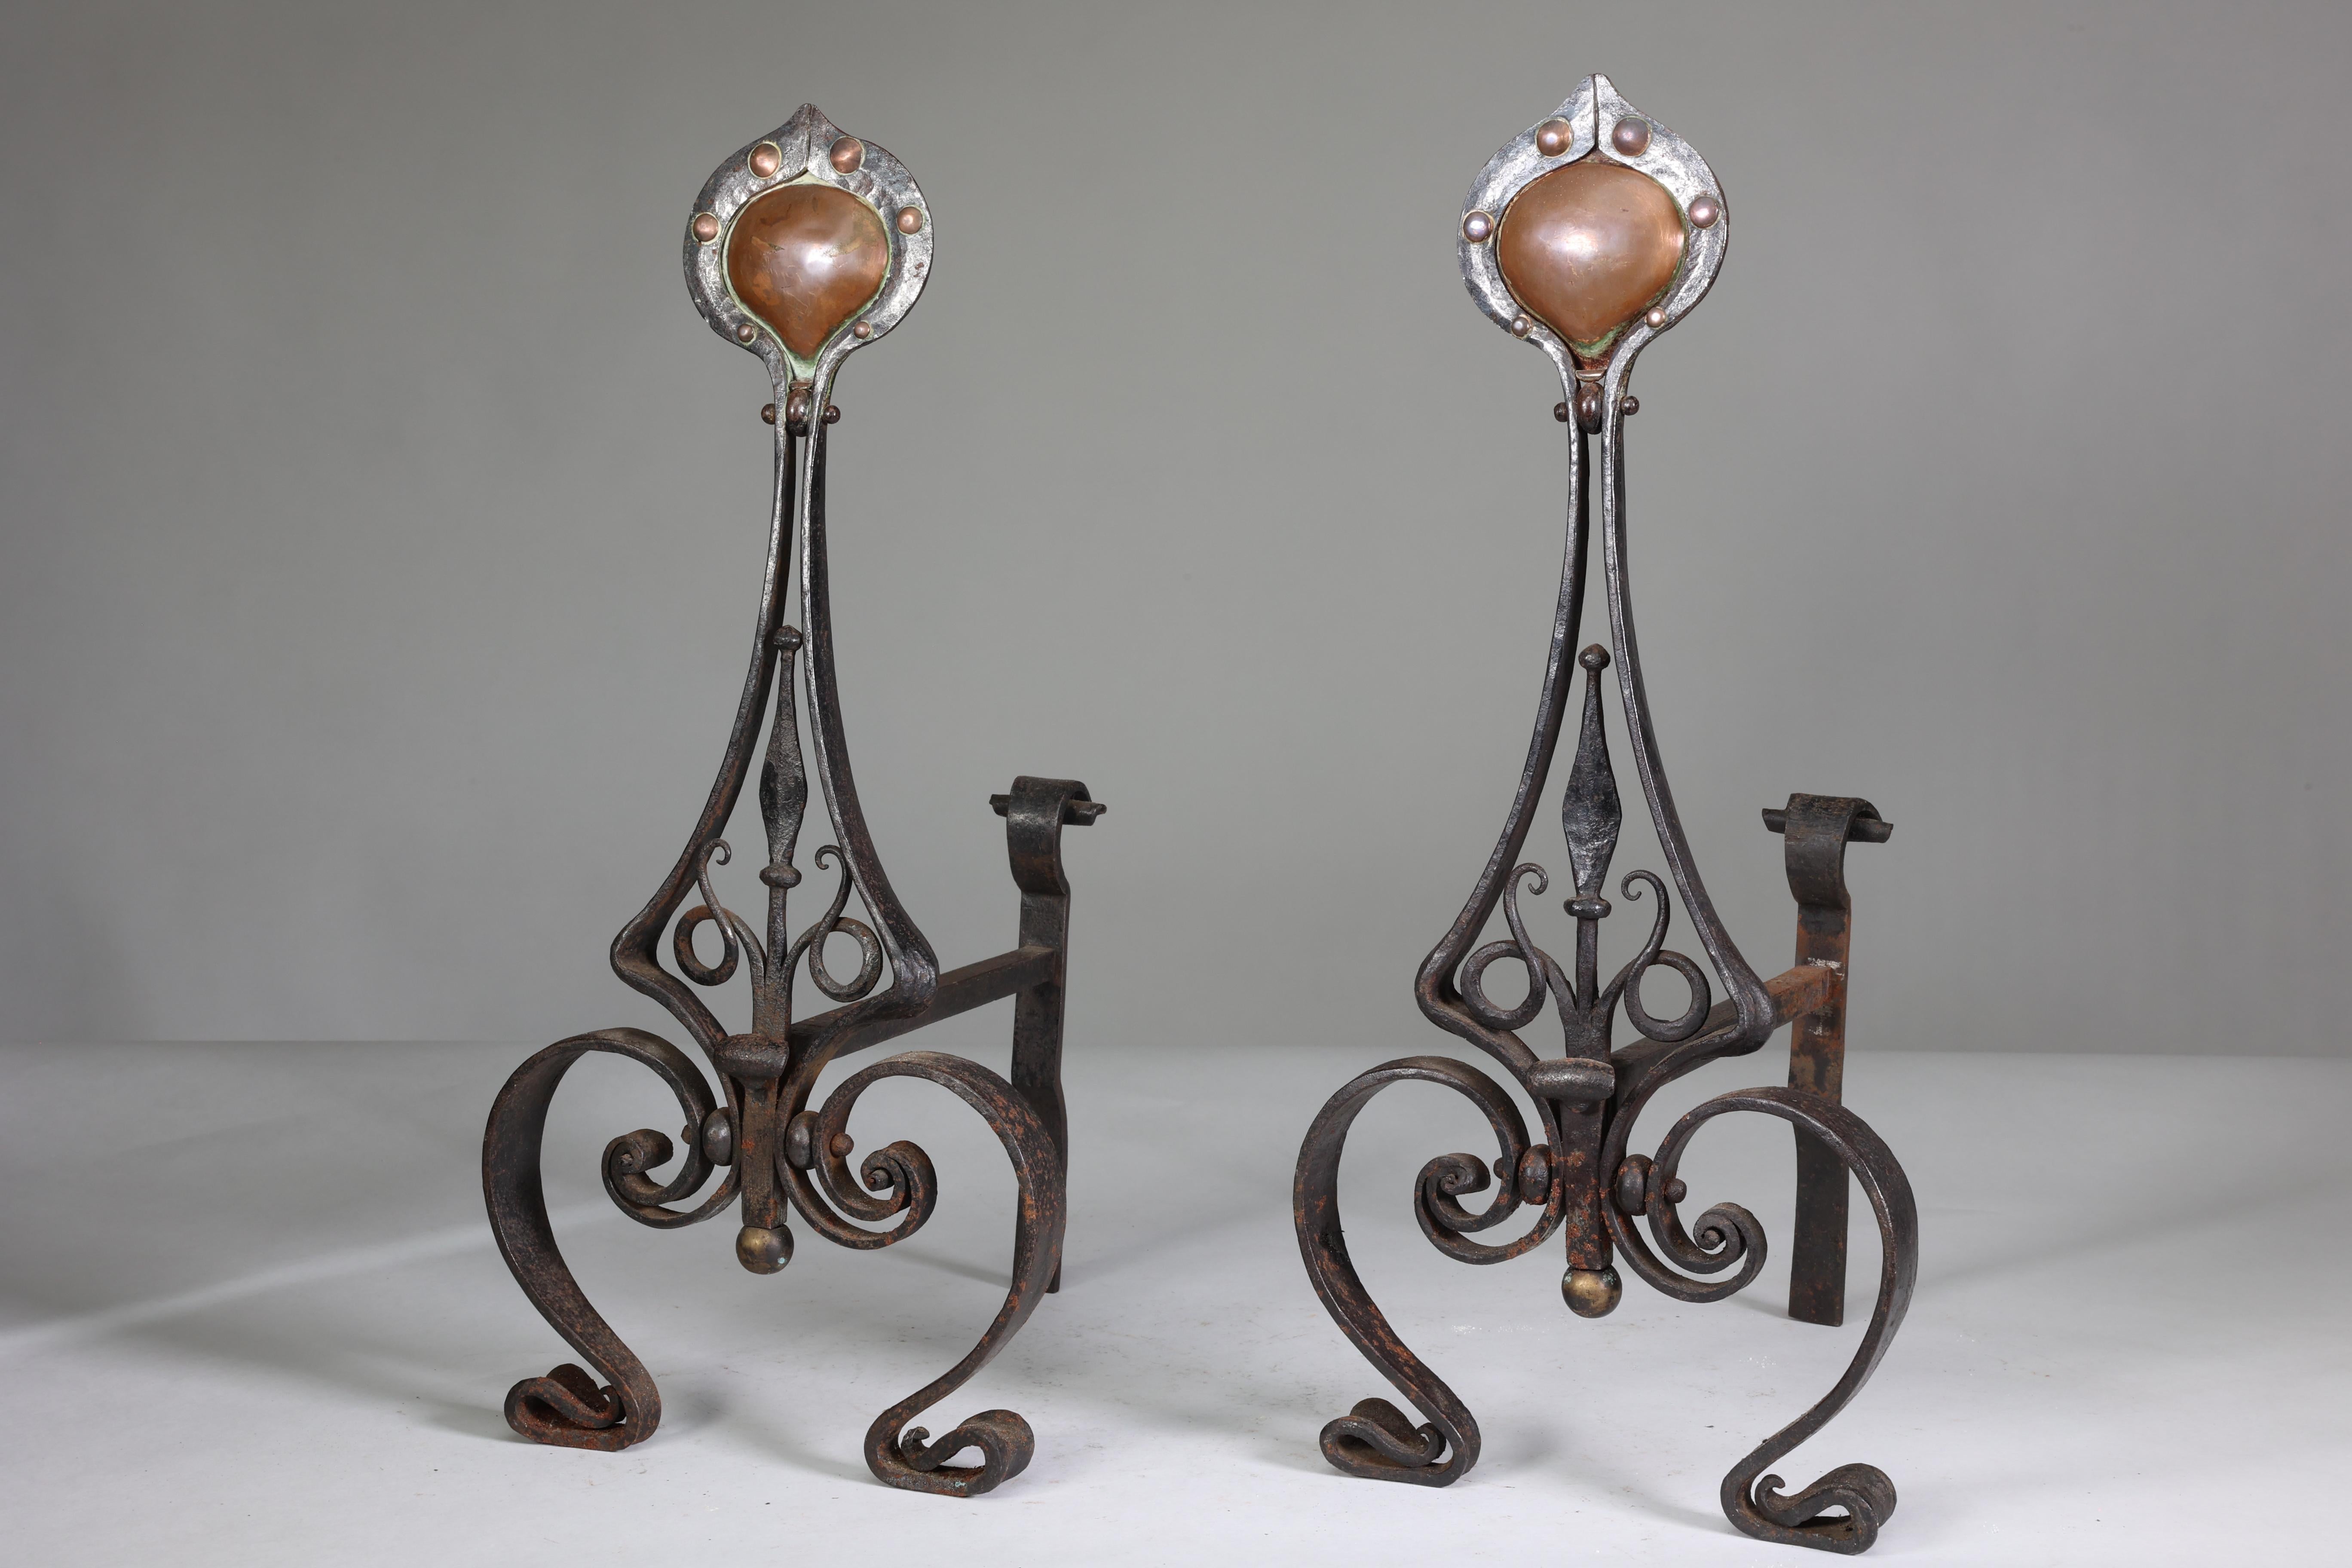 C R Ashbee for The Guild of Handicraft, attributed. An early pair of hand-wrought iron fire dogs with inset copper hearts to the tops. Very fine blacksmiths work with hand-hammered flat flowerheads flowing down to frame the central spearhead and